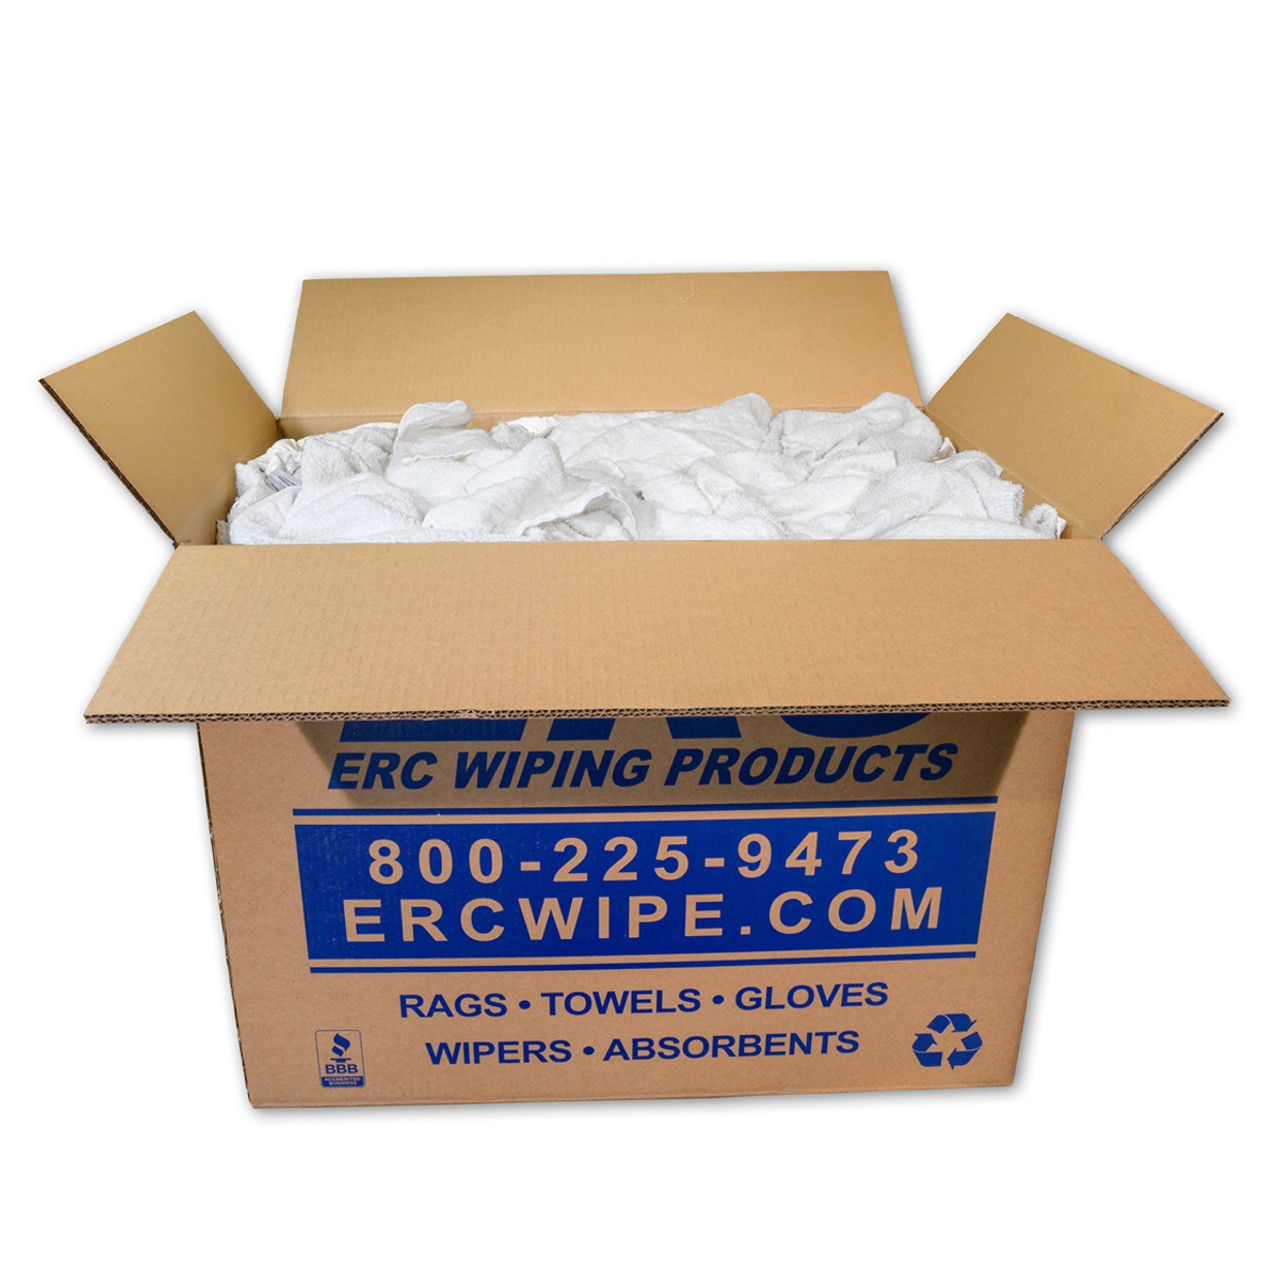 https://cdn11.bigcommerce.com/s-a5uwe4c7wz/images/stencil/1280x1280/products/602/2305/Terry-Toweling-Rags-Bulk-Recycled-Large-Pieces-White-50-Lb-Box__07872.1663615964.jpg?c=1